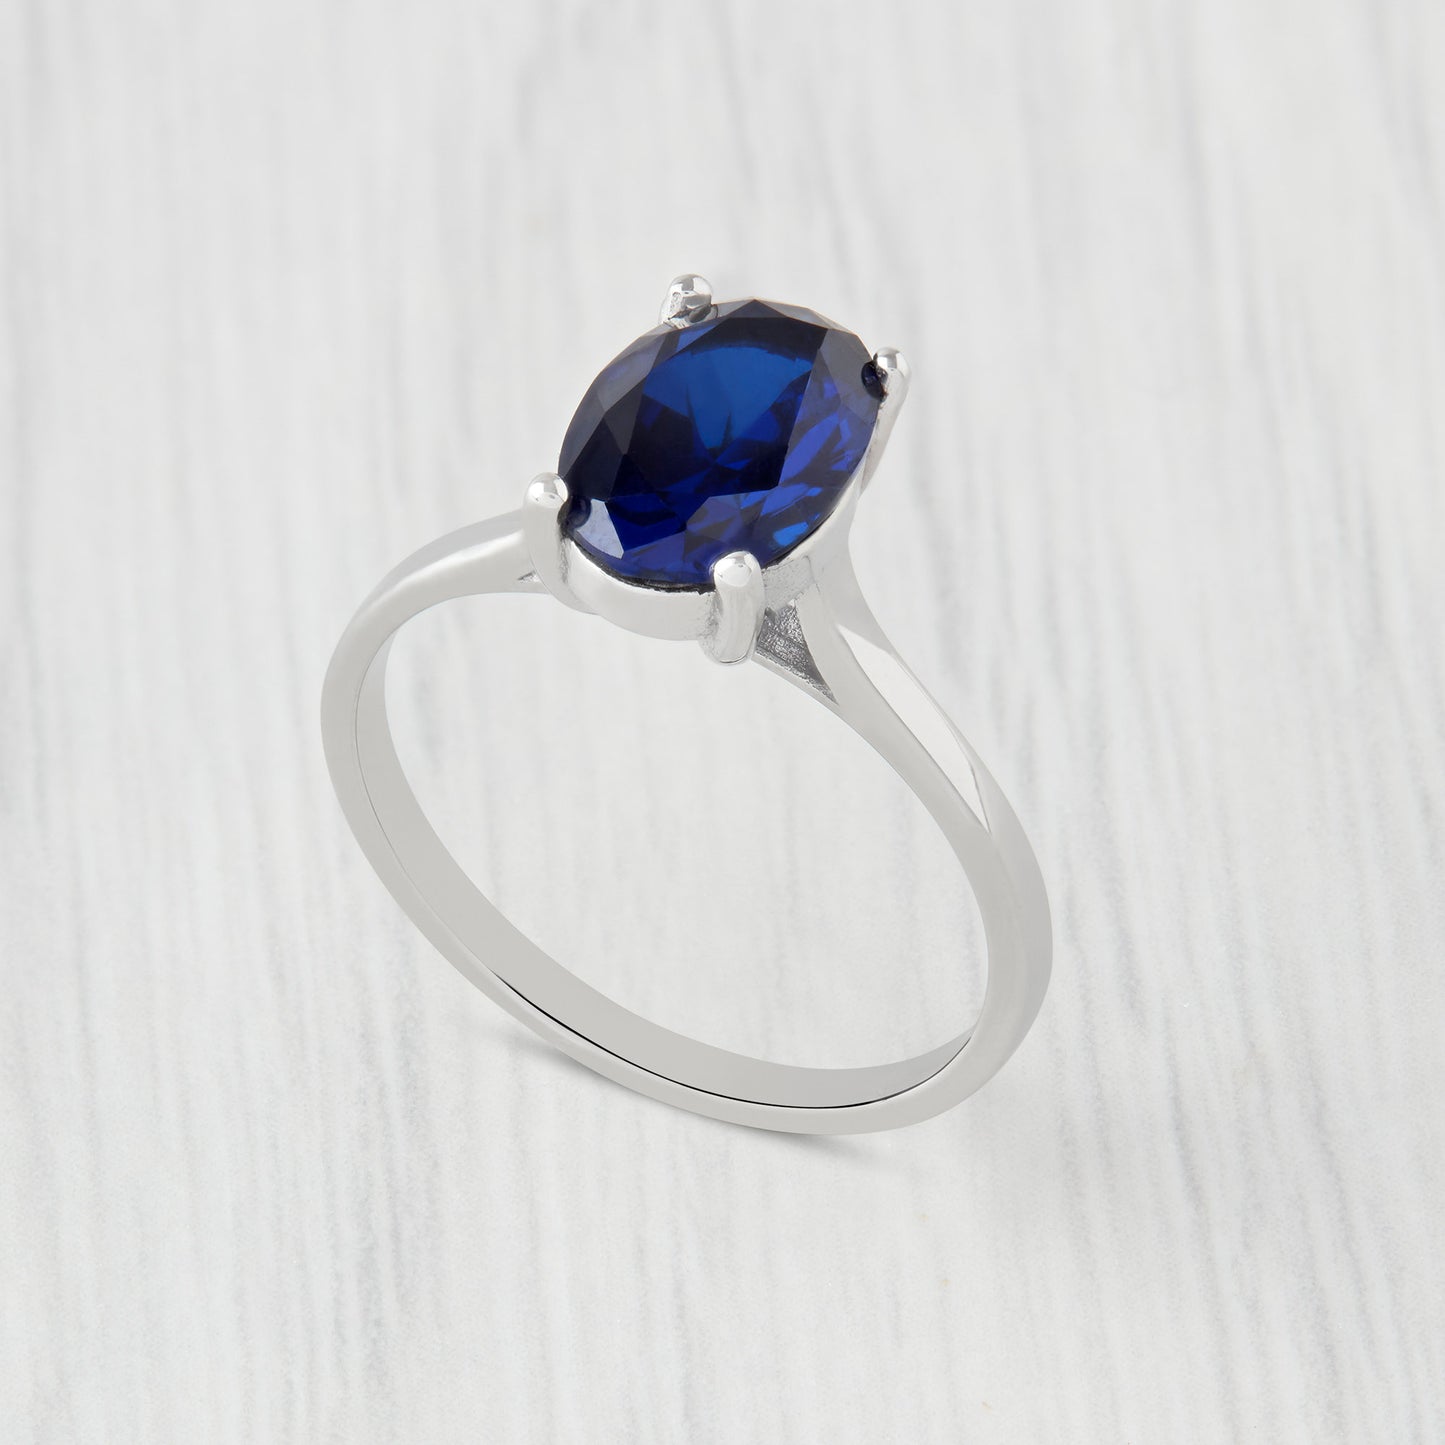 1.7ct Oval Cut Lab Blue Sapphire Solitaire cathedral ring in Titanium or White Gold